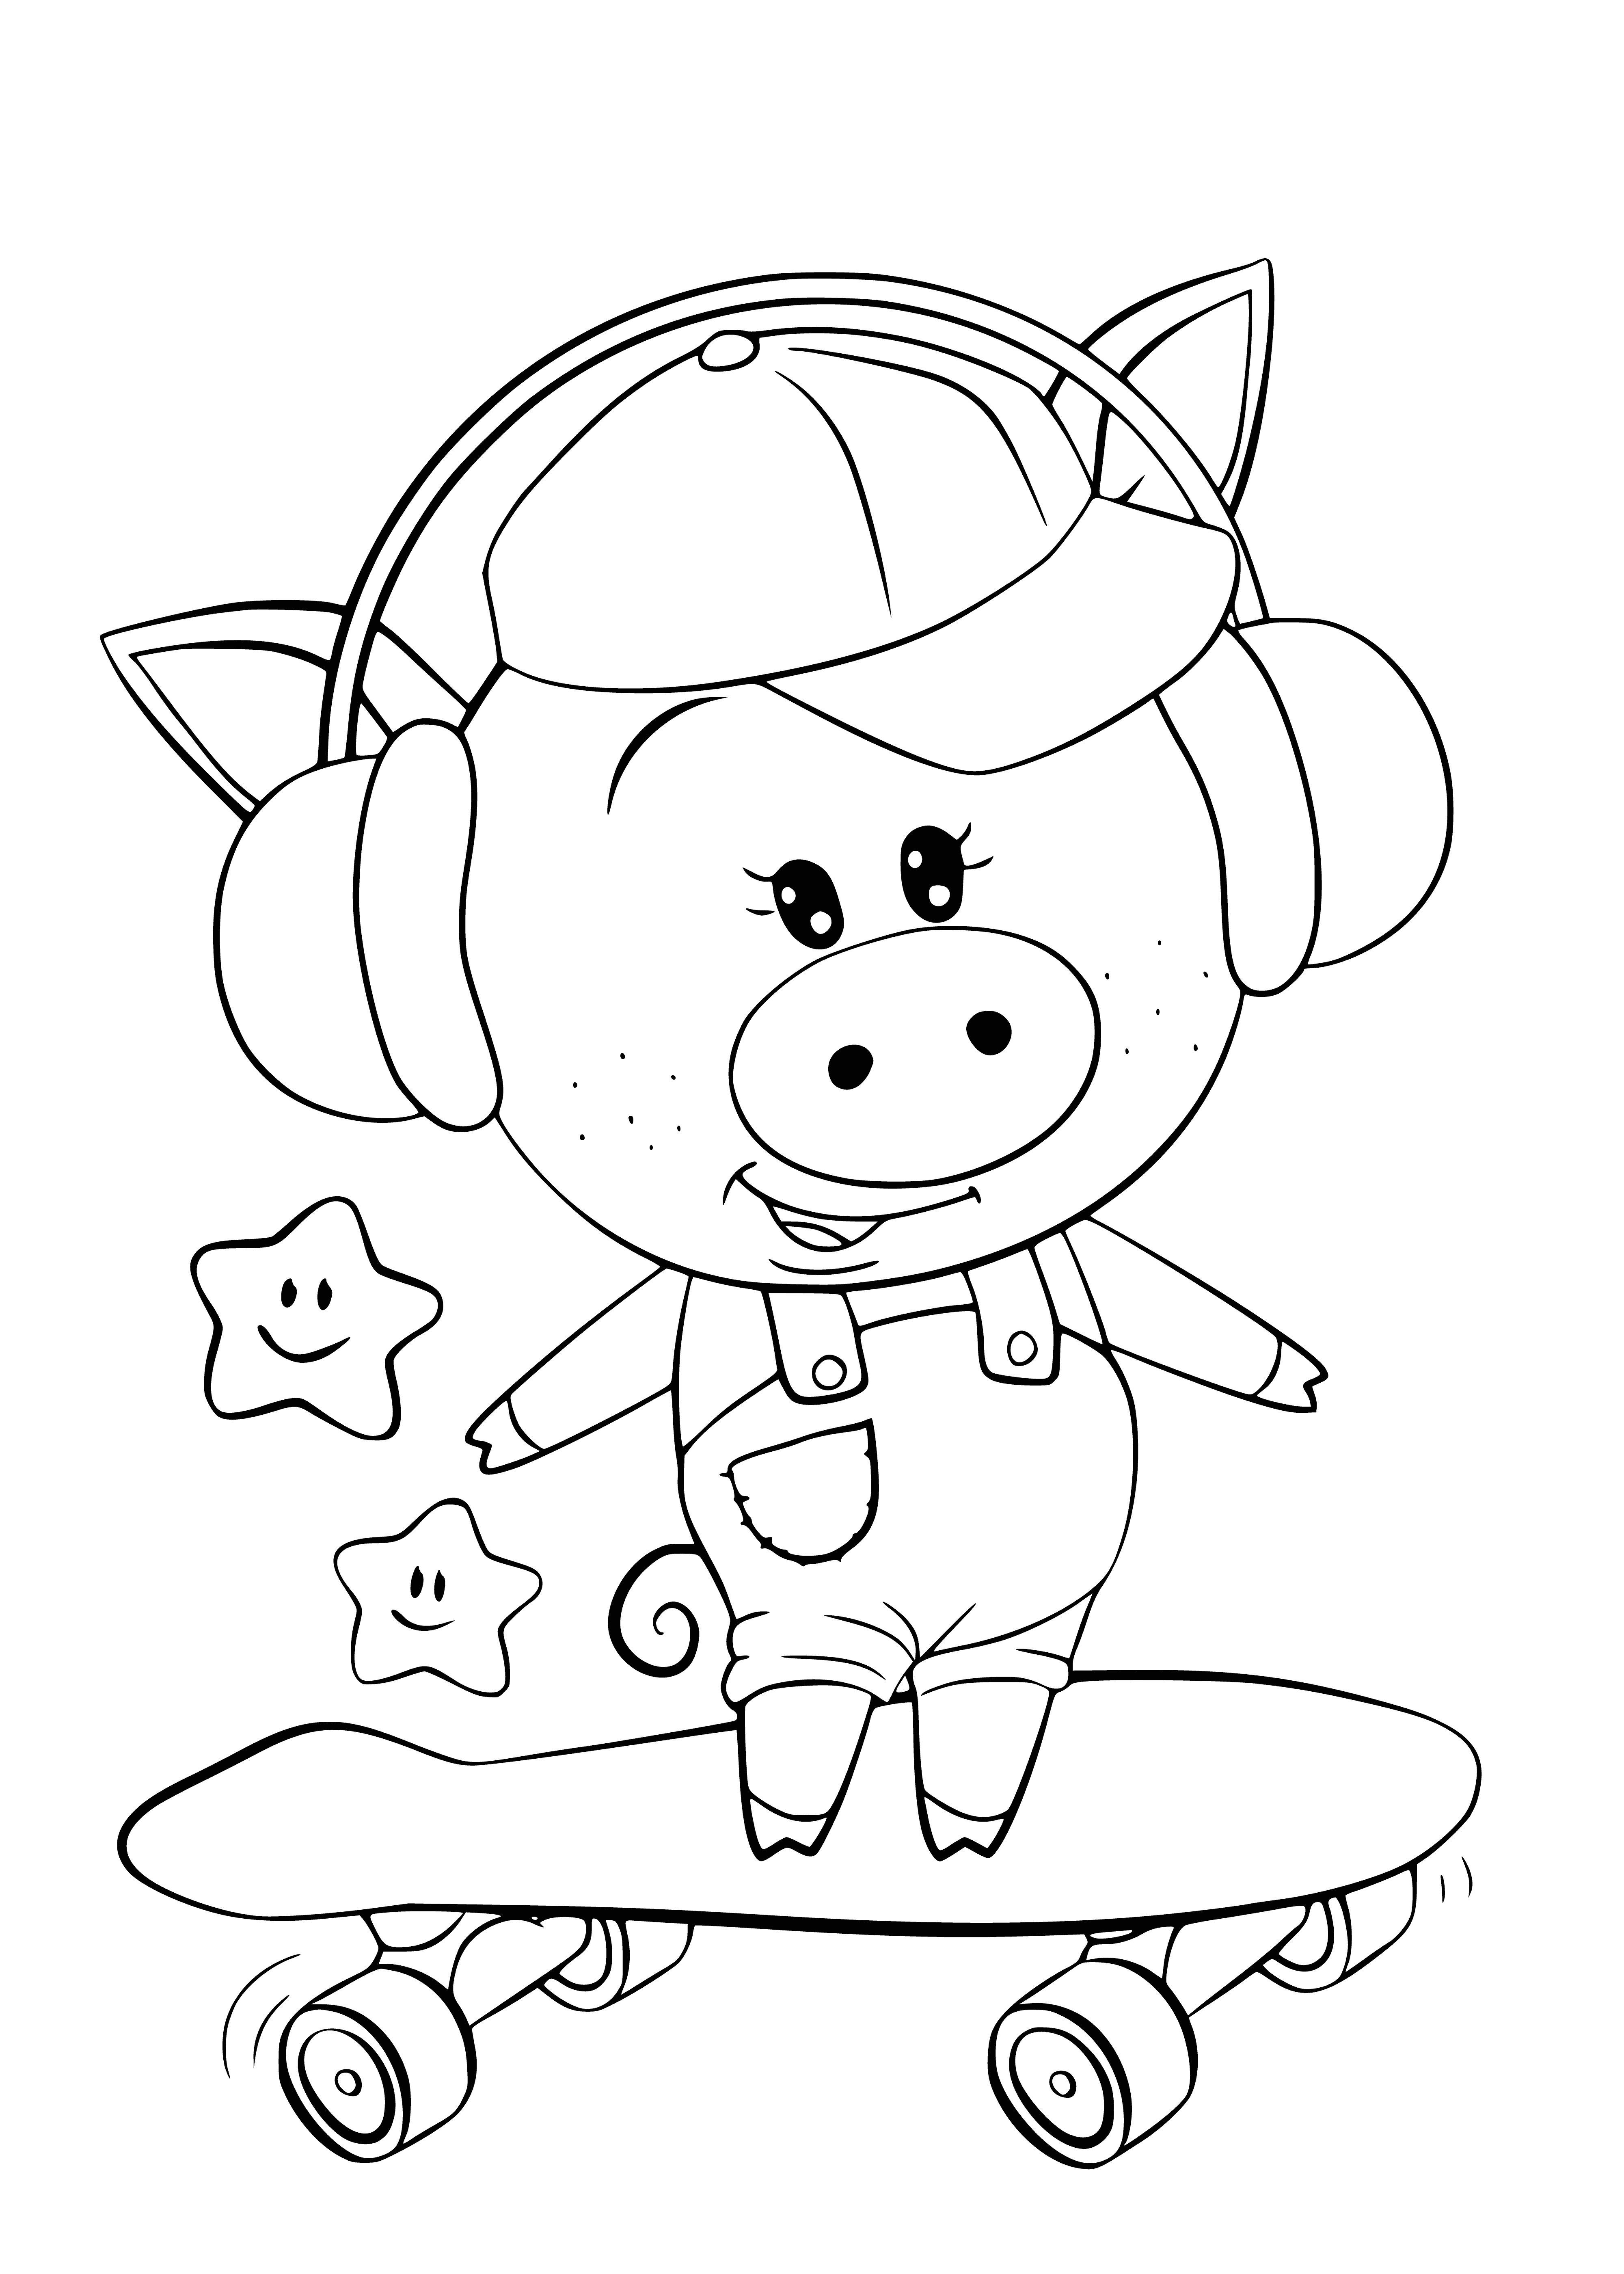 coloring page: Pig skateboards wearing a helmet, holding hooves on a Kawaii-style skateboard, against a rainbow background. #KawaiiColoring #Skateboarding